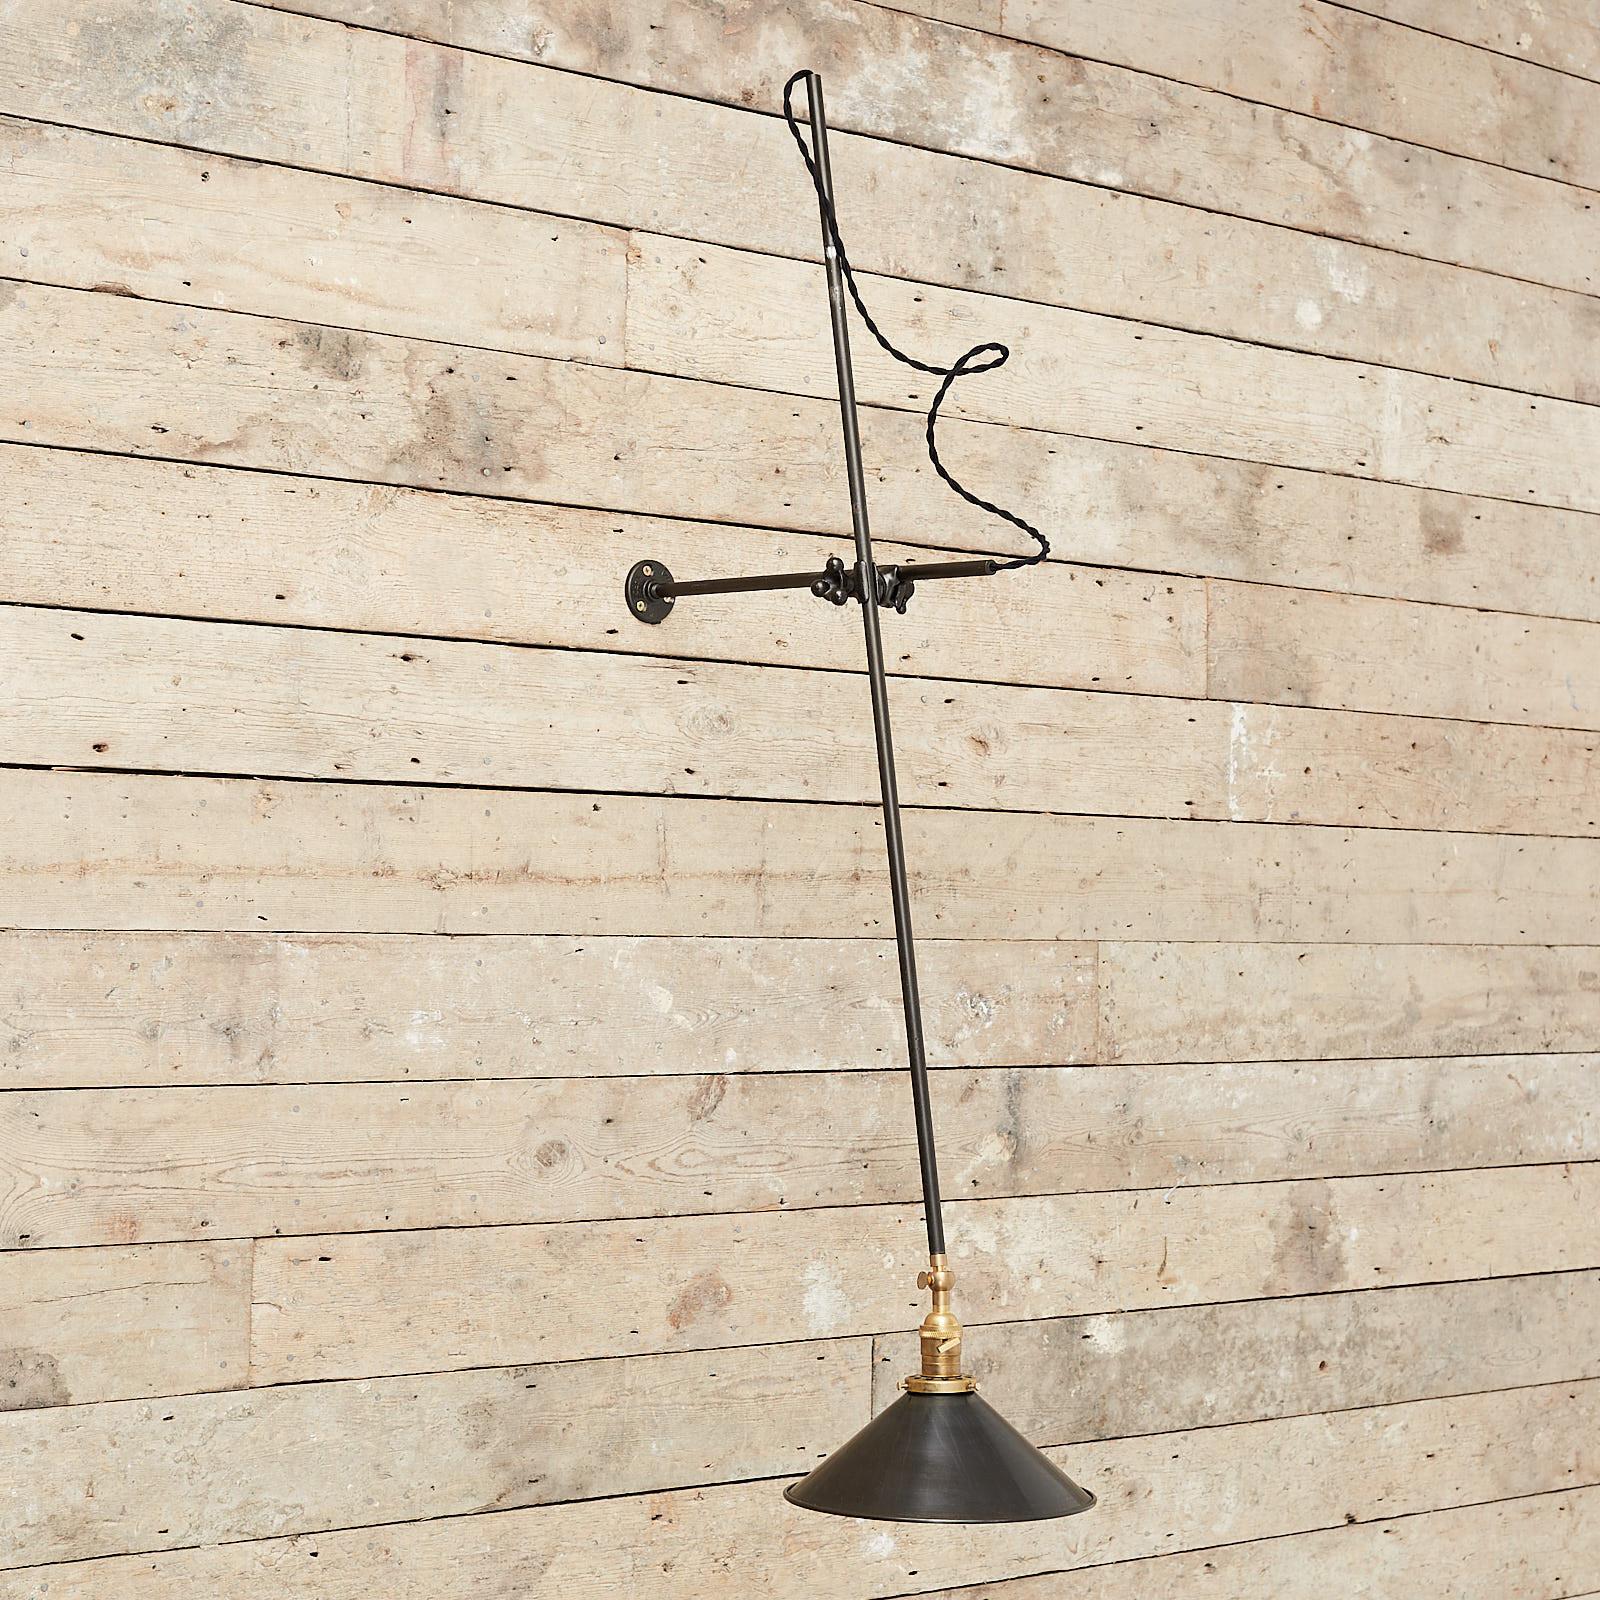 A well constructed modernist cantilever wall mounted light. The black enameled steel tube reaches out from the round wall mount. The decorative articulating mechanism is steel and the lamp holder and shade mount are in brass. The shade is black